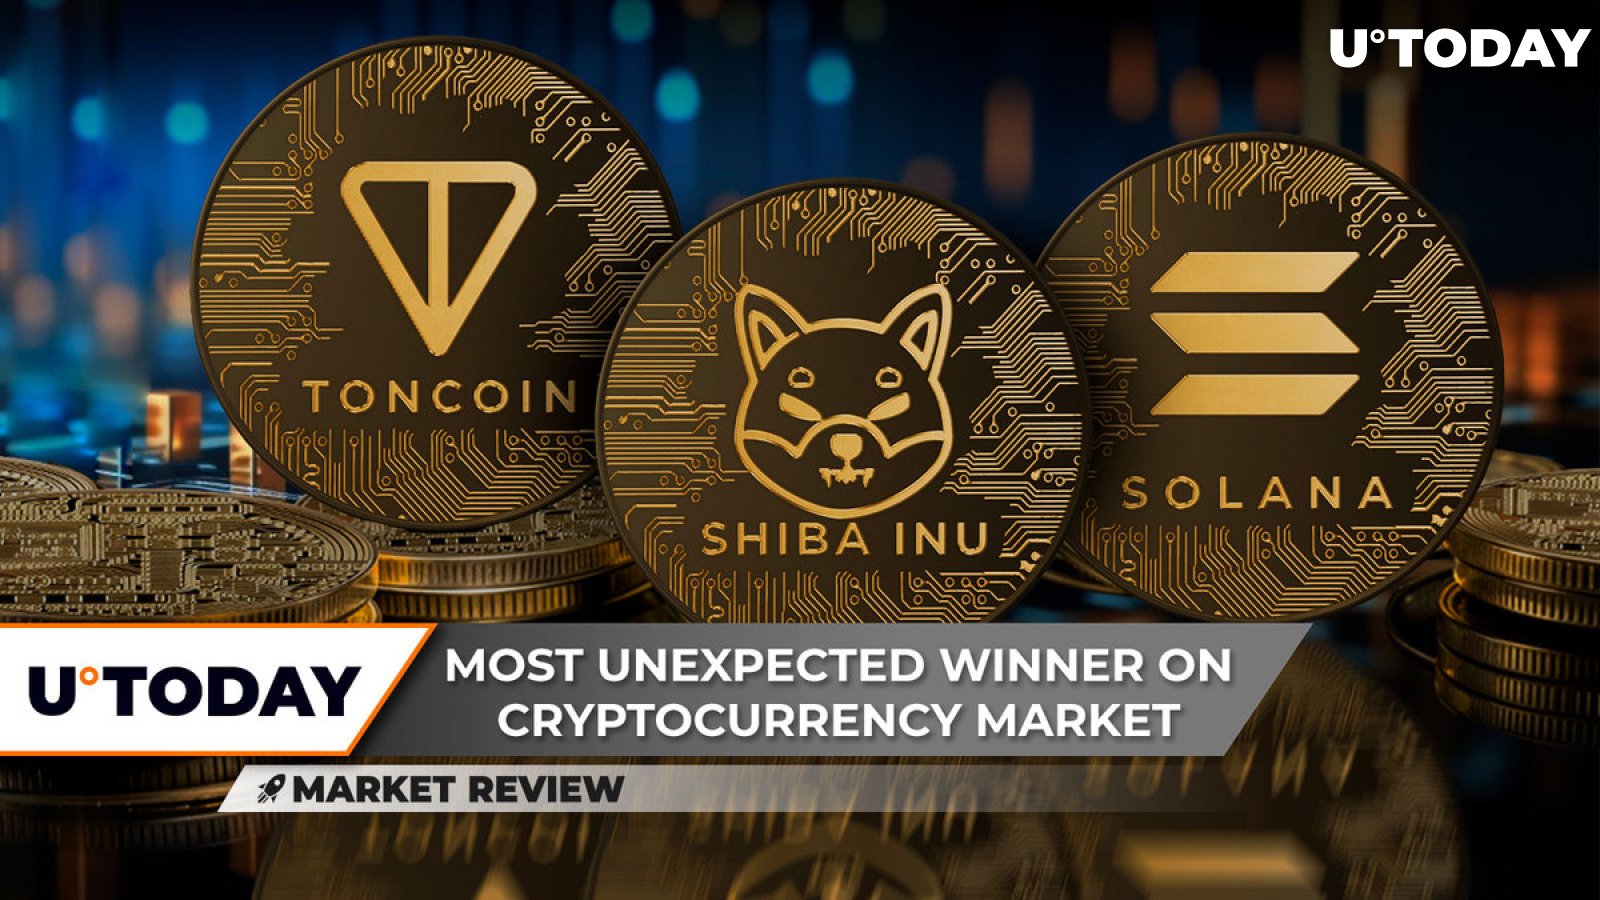 Toncoin (TON) Becomes Strongest Cryptocurrency on Market, Watch This Shiba Inu (SHIB) Level for Reversal, Solana (SOL) Price Rebounds to $150